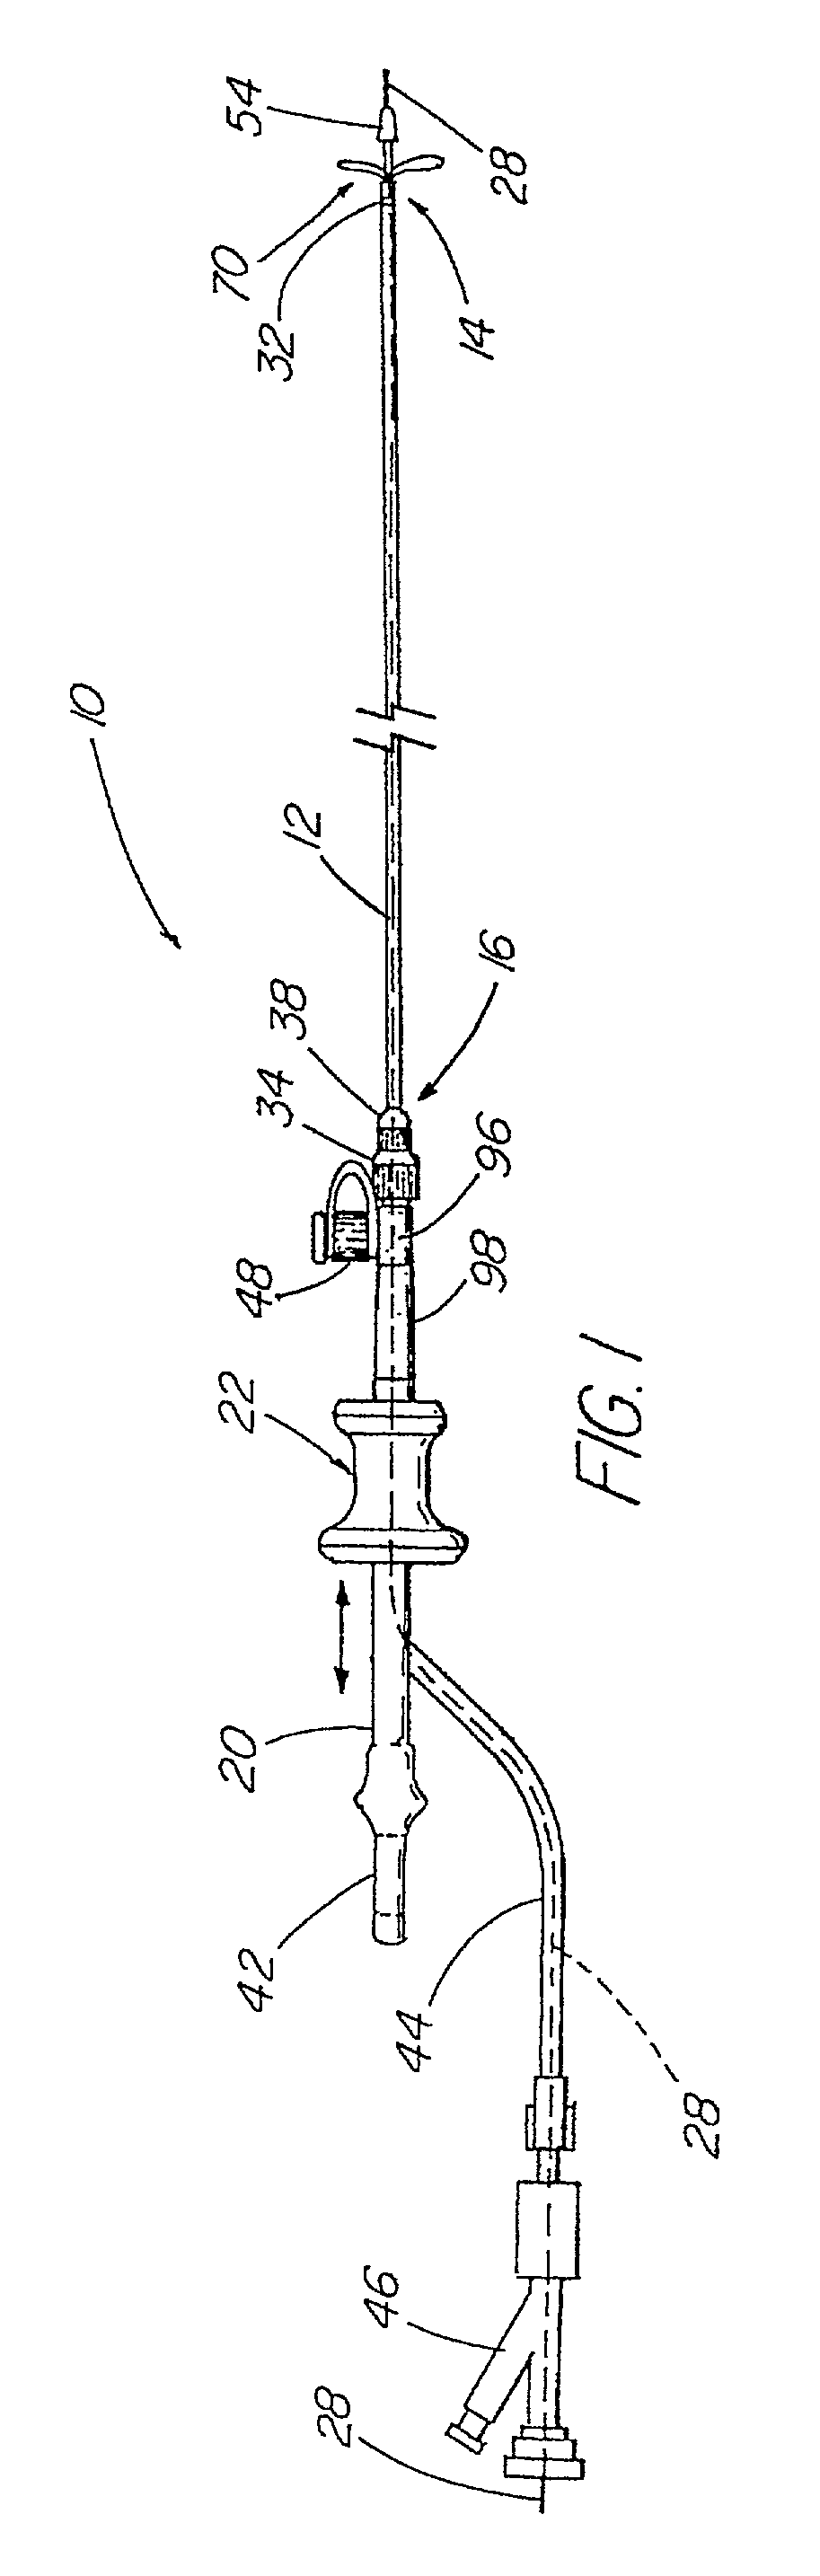 Medical grasping device